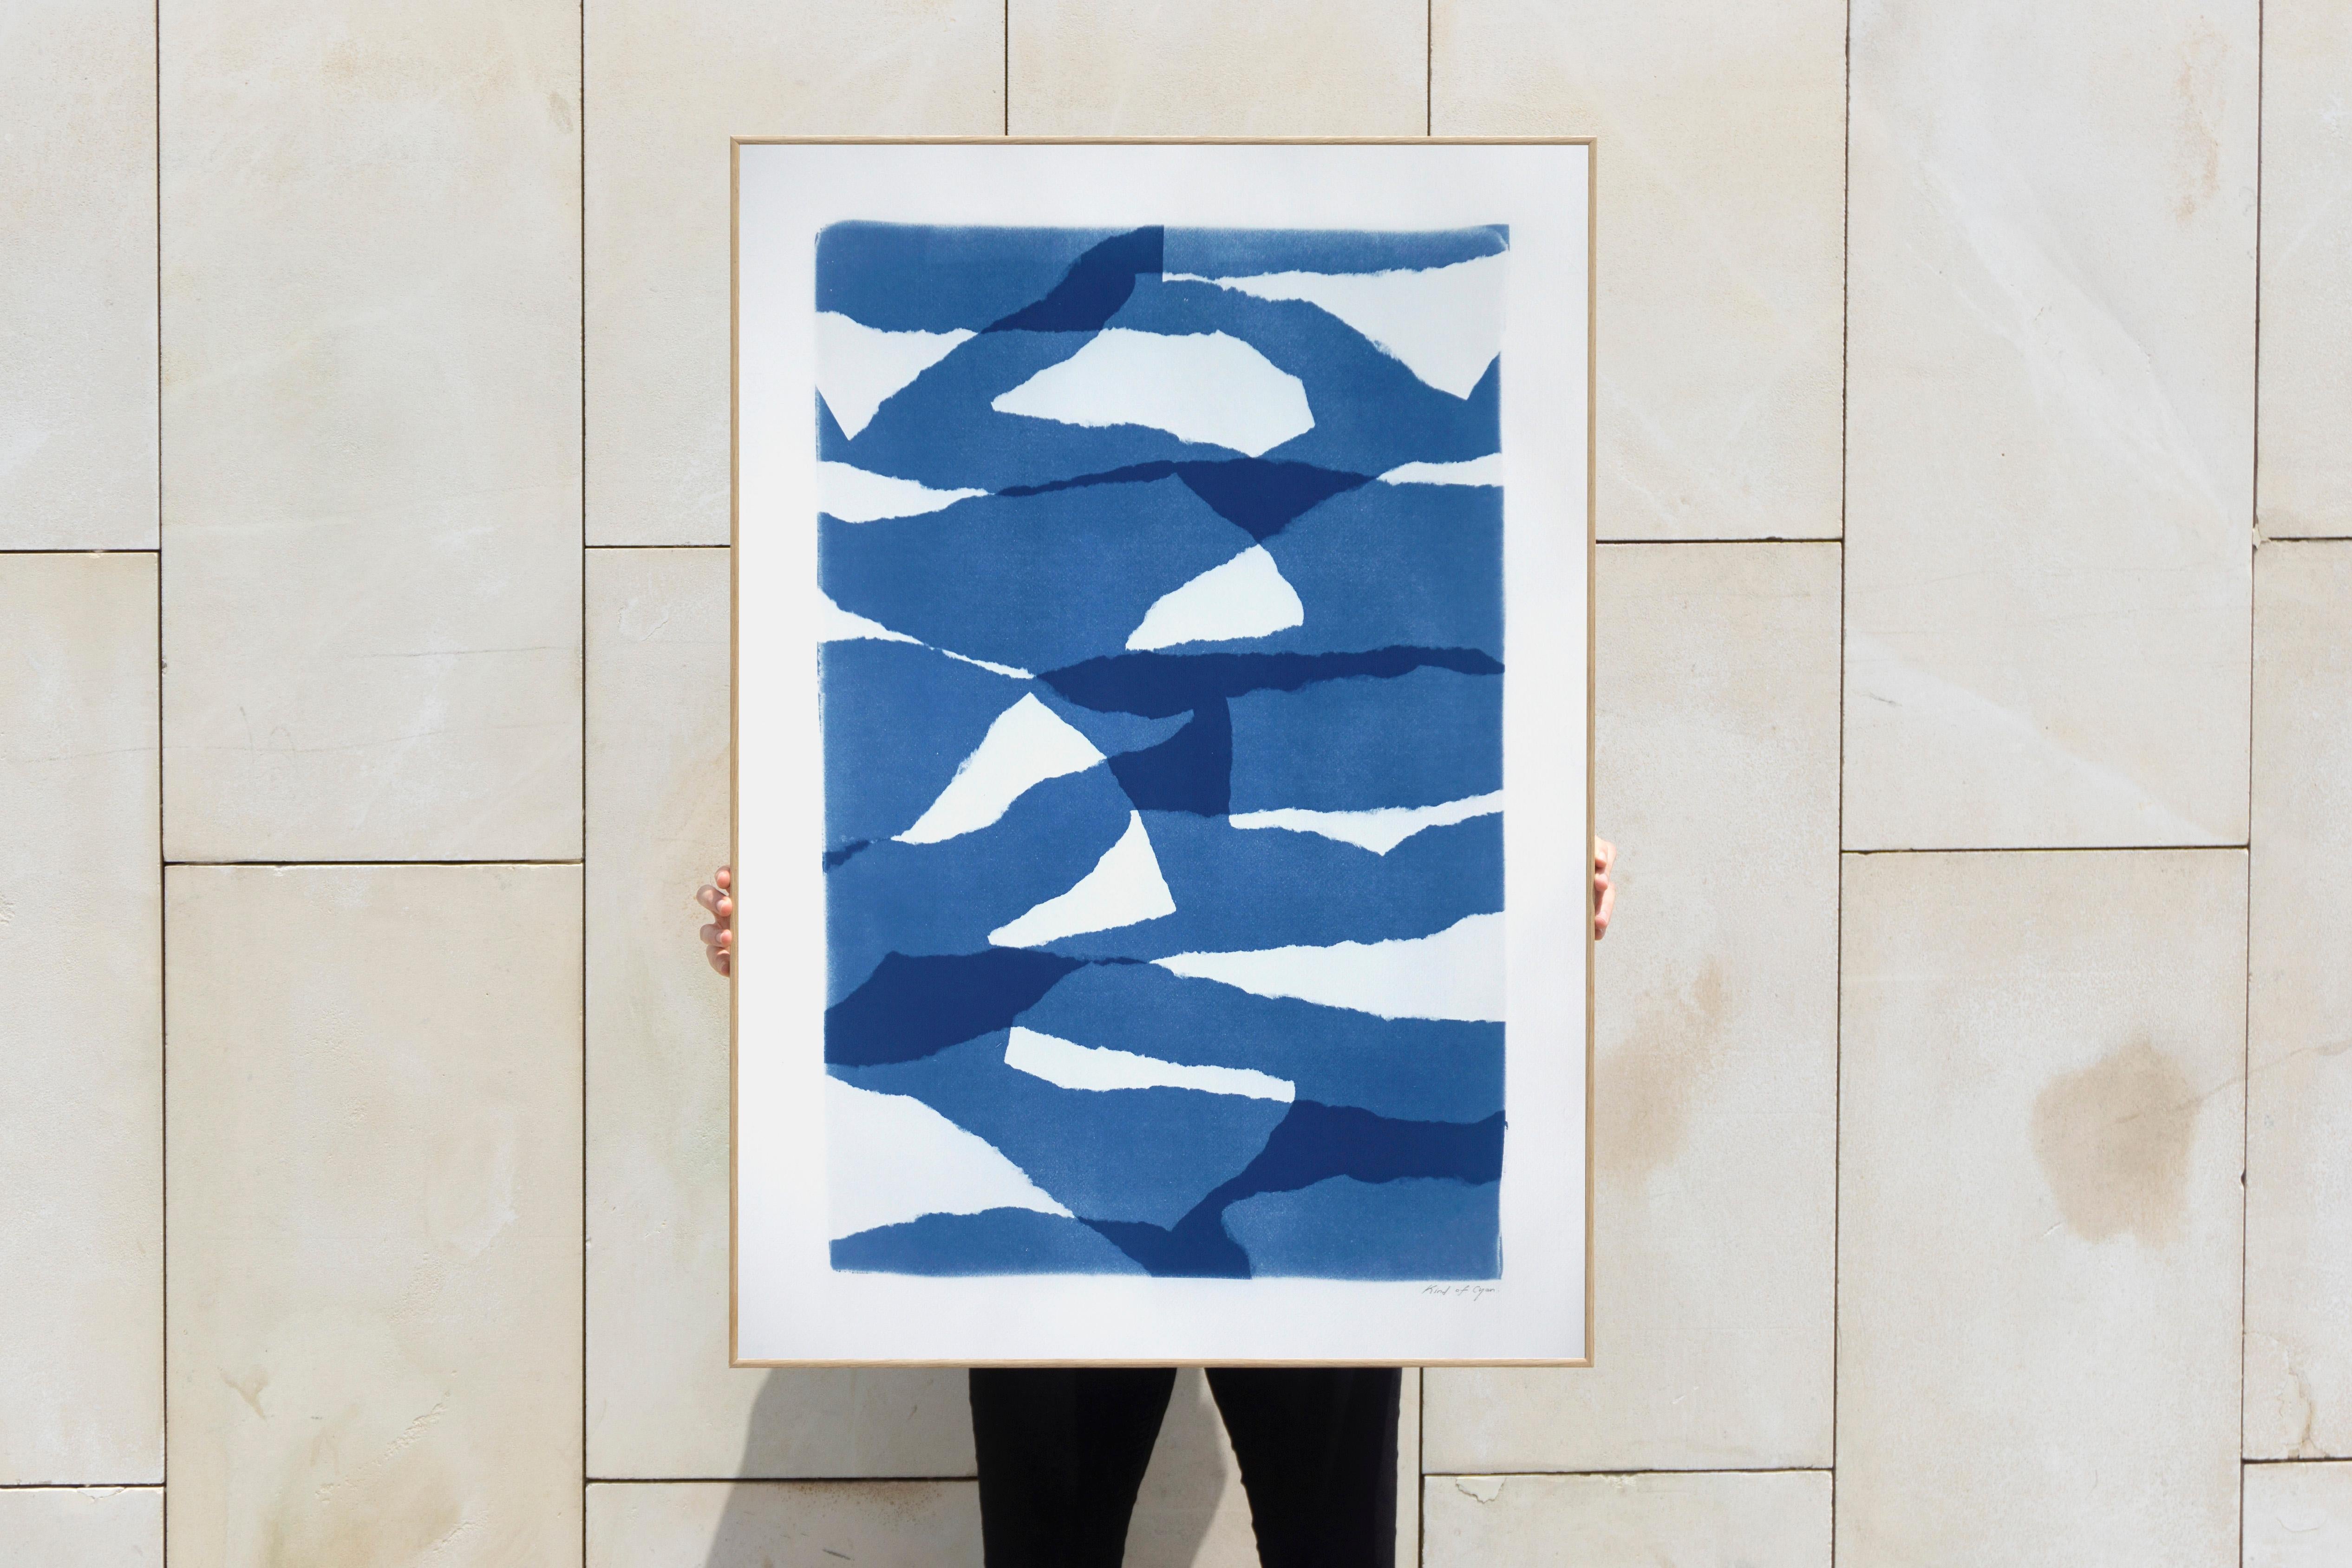 Layered Torn Paper, White and Blue Unique Print, Abstract Construction Shapes 2